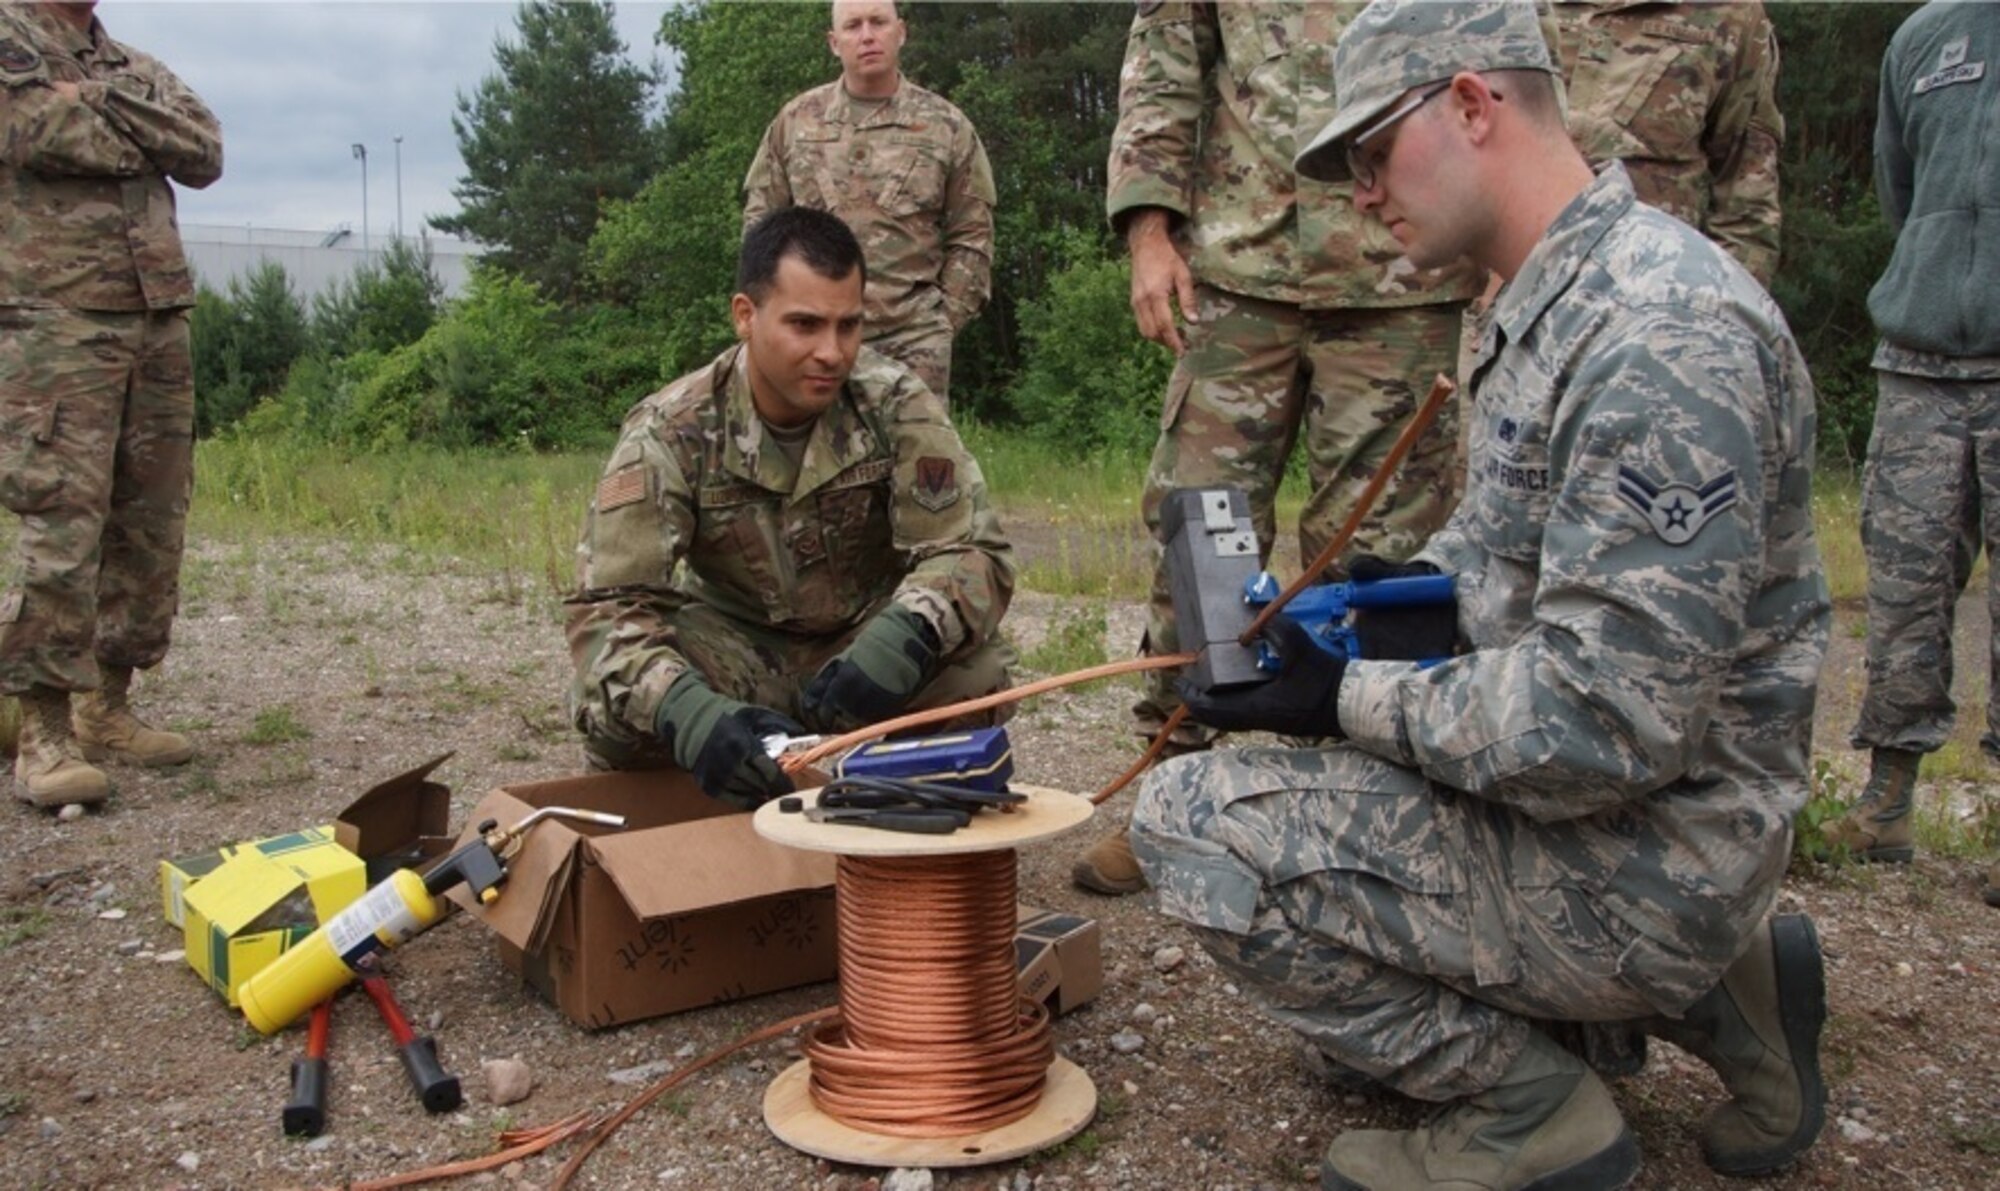 U.S. Air Force Senior Amn. Jorge Lizardi, 235th Air Traffic Controller Squadrons (ATCS) and Airman 1st Class Gabriel Archambault, 260th ATCS receive cad welding training in Ramstein, Germany, June. 4th, 2019. The North Carolina Air National Guard, along with New Hampshire and Maine Air National Guard, flew to Ramstein Air Base, Germany to work with active duty 1st Combat Communications Squadron. The Air National Guard units assisted in training the active duty unit with set-up, use, and tear-down of a mobile tower and deployable tactical air navigation system. (Courtesy Photo by SrA Tsua Yang)